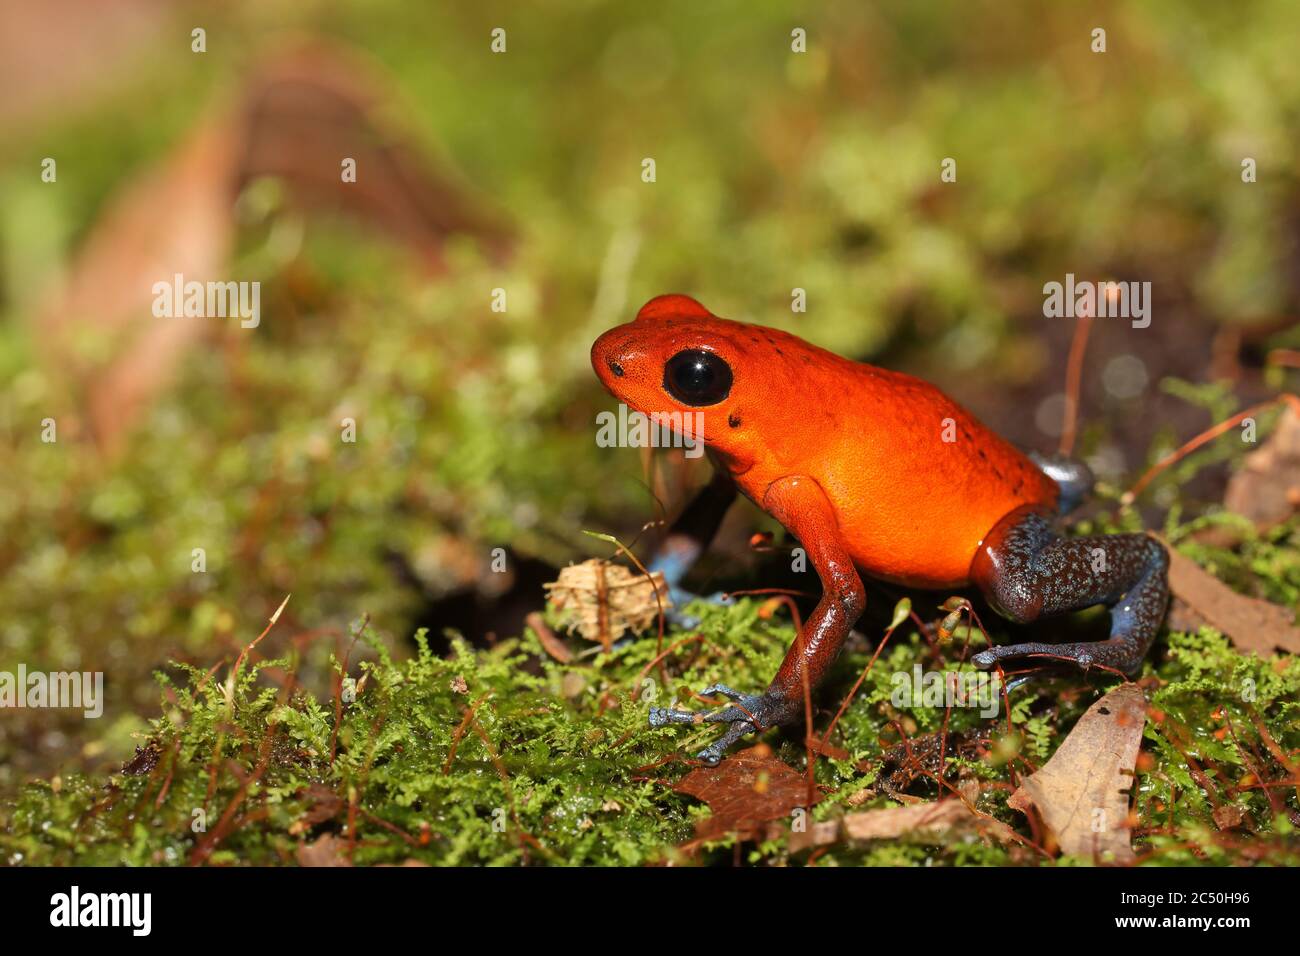 Strawberry poison-arrrow frog, Red-and-blue poison-arrow frog, Flaming poison-arrow frog, Blue Jeans Poison Dart Frog (Dendrobates pumilio, Oophaga pumilio), sitting in moss on the ground, side view, Costa Rica, Sarapiqui Stock Photo